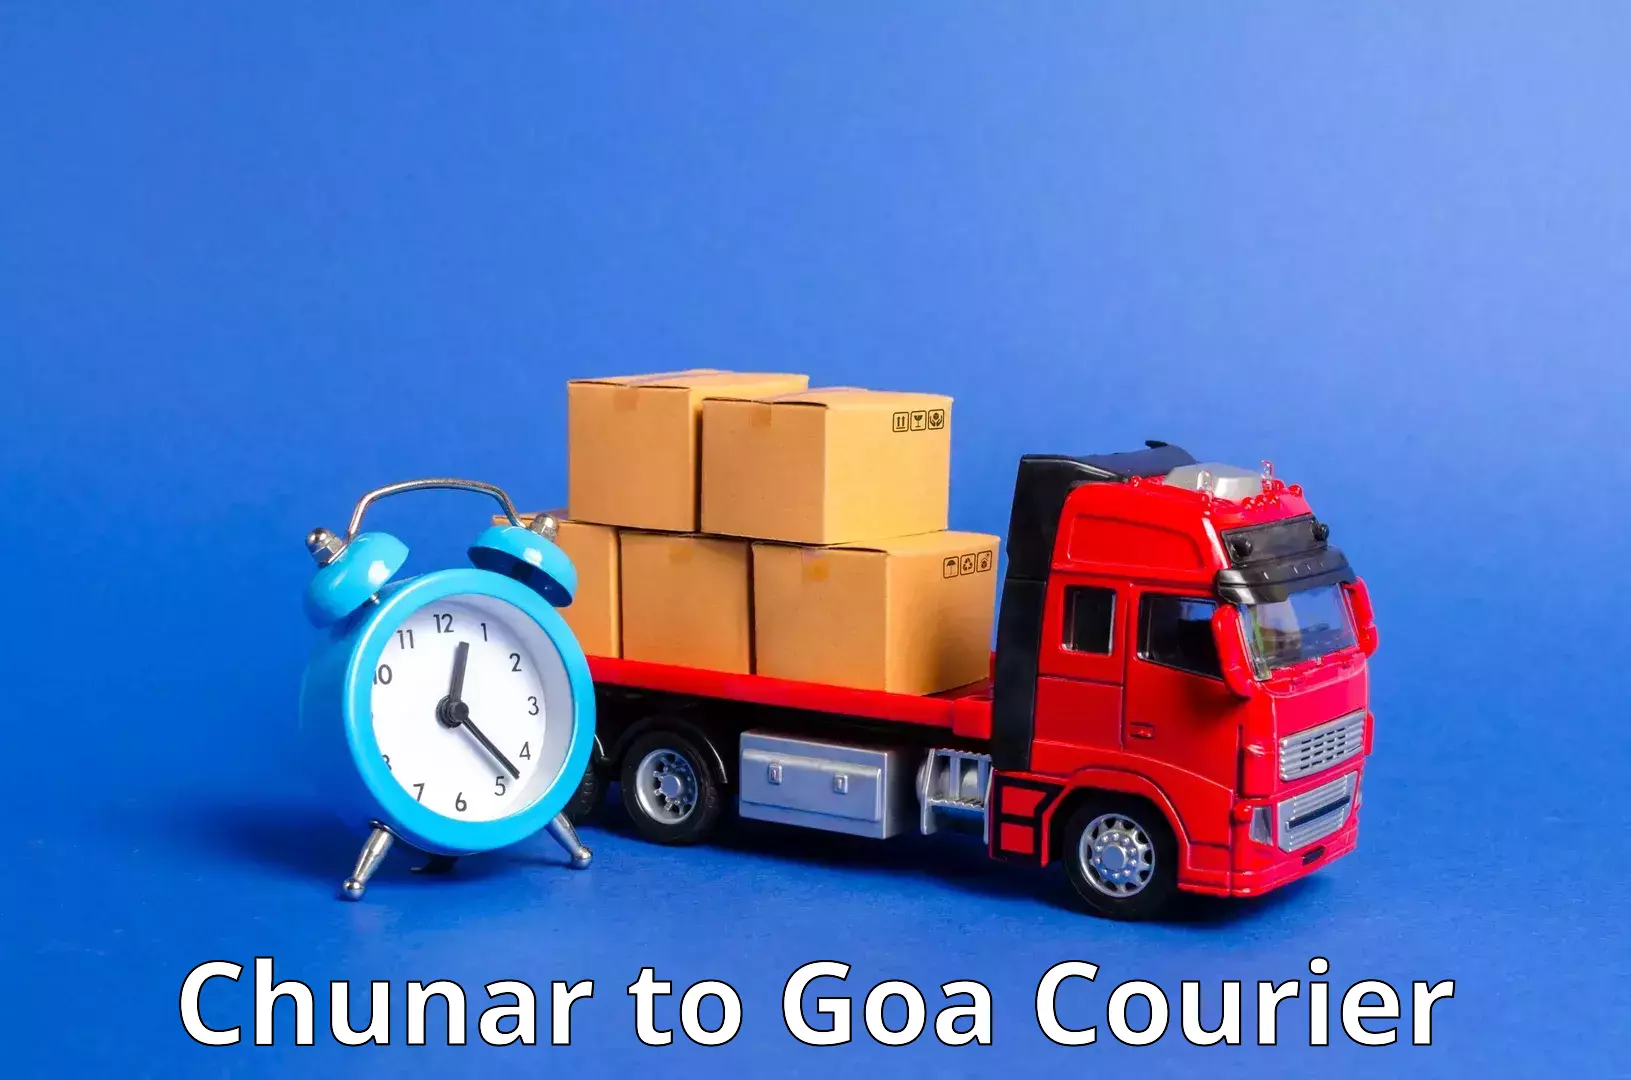 Express delivery capabilities Chunar to Goa